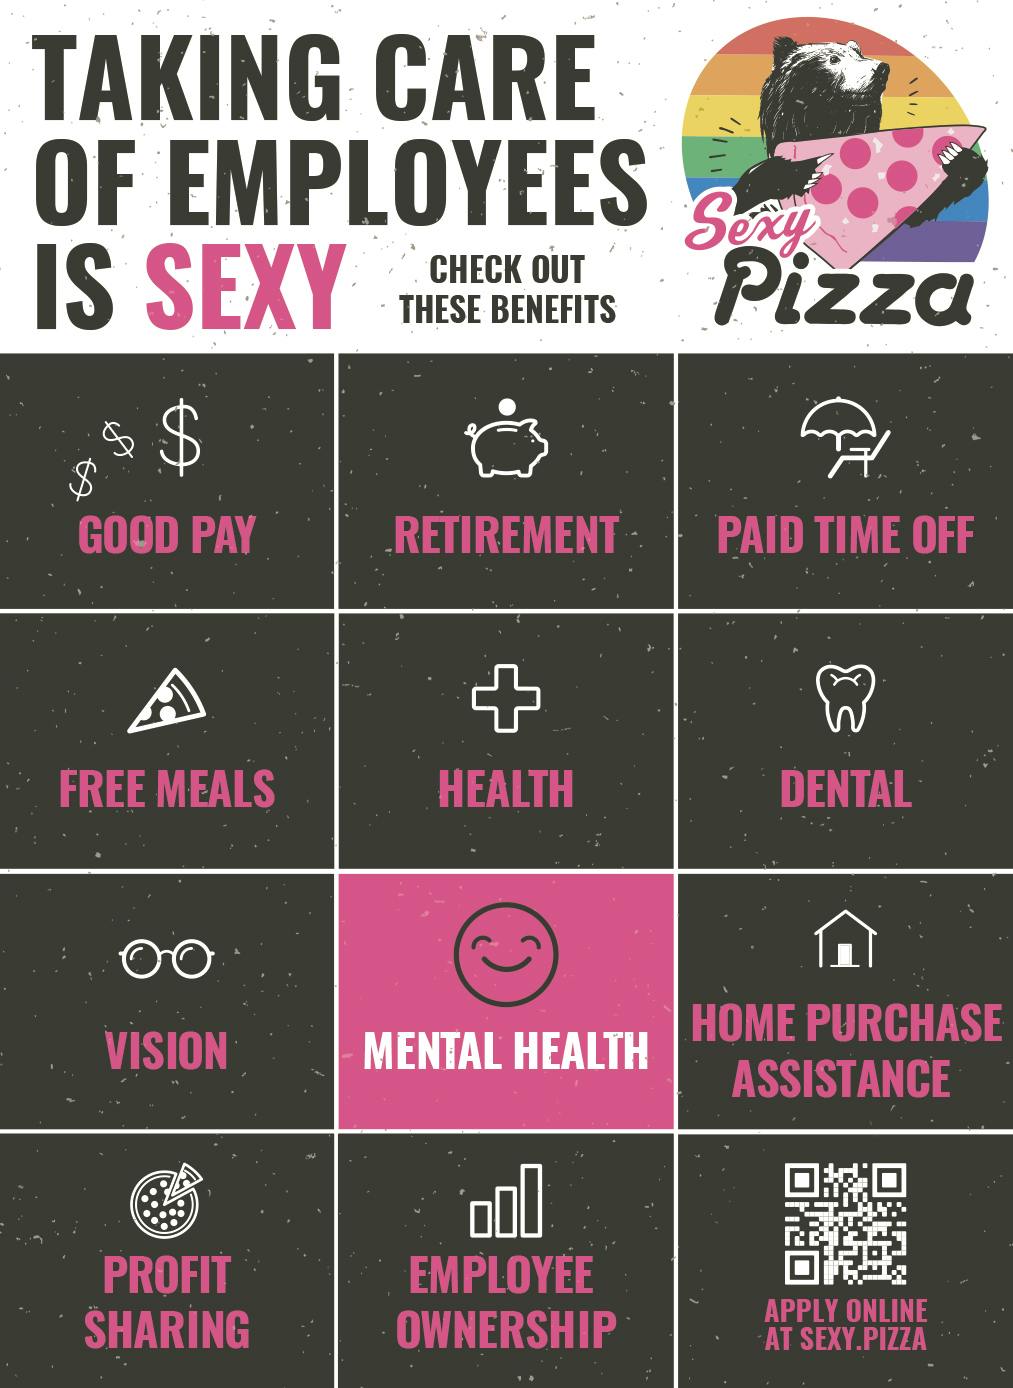 Sexy Pizza - Taking care of employees is sexy